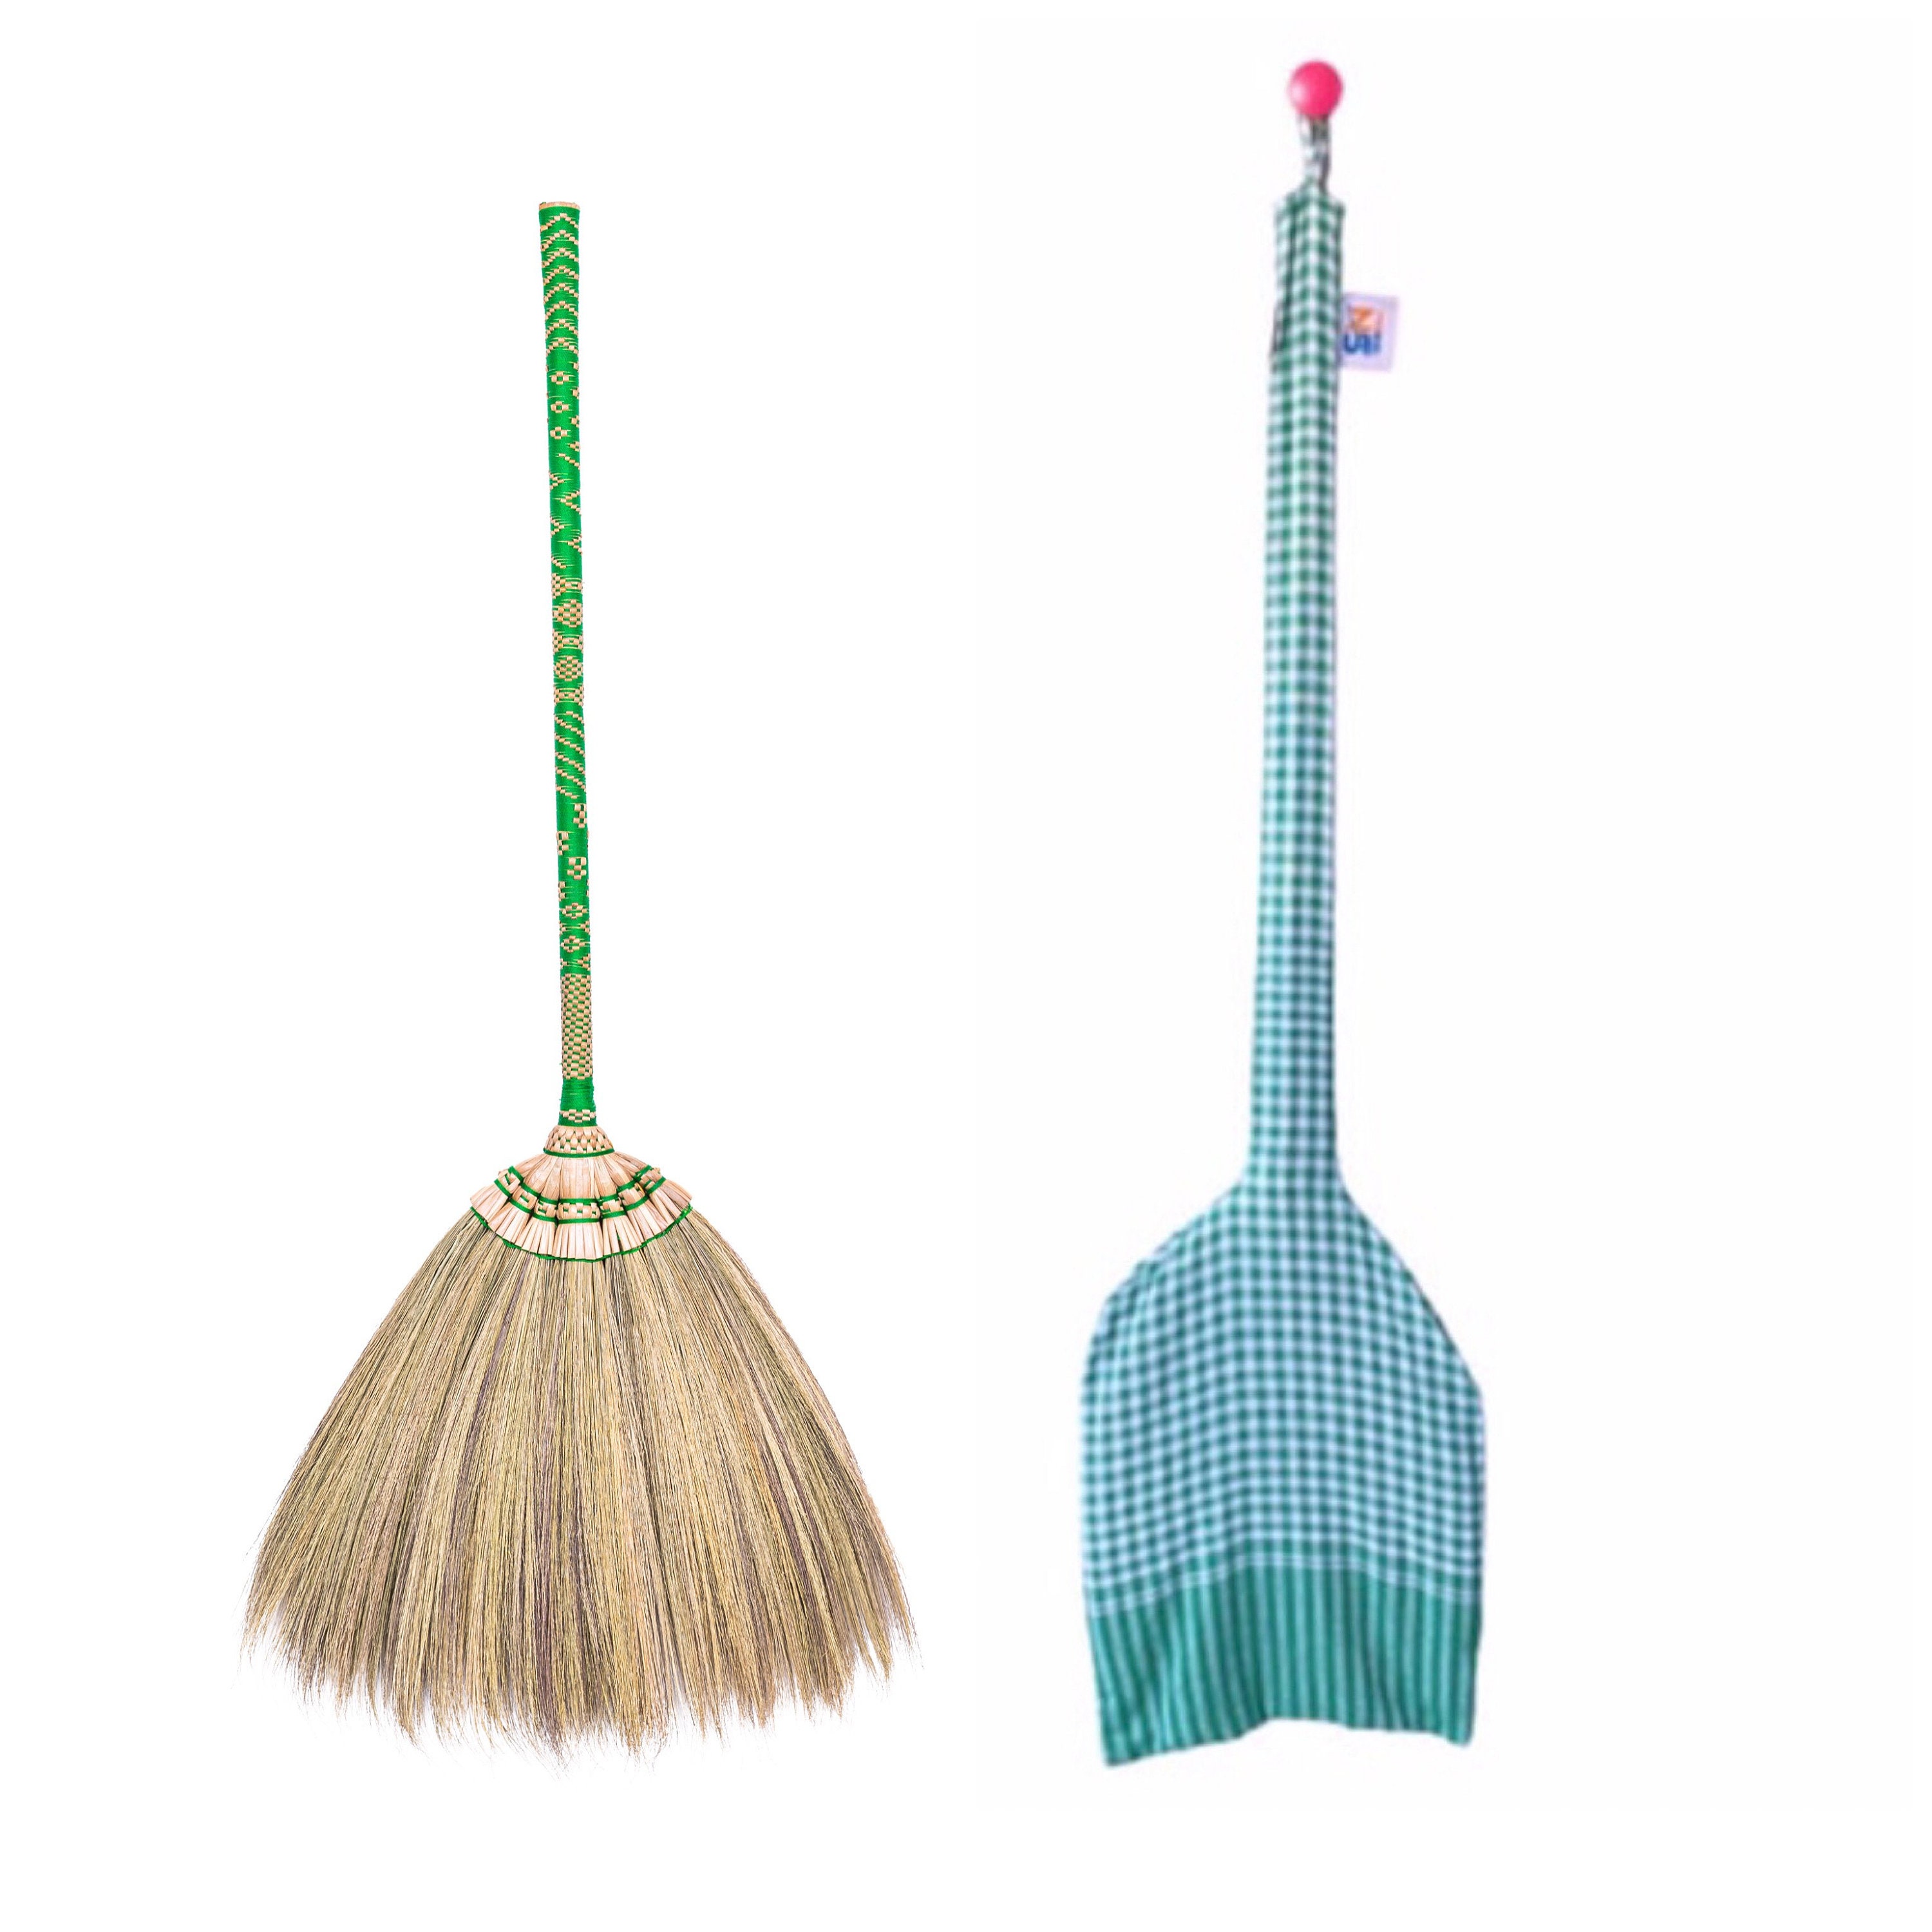 Vietnamese Straw Soft Broom for Cleaning Dustpan Indoor-Outdoor Sofa Car Hood 9.84'' Width 27.55 Length Decoration Items BMart Home Natural Whisk Sweeping Hand Handle Broom 